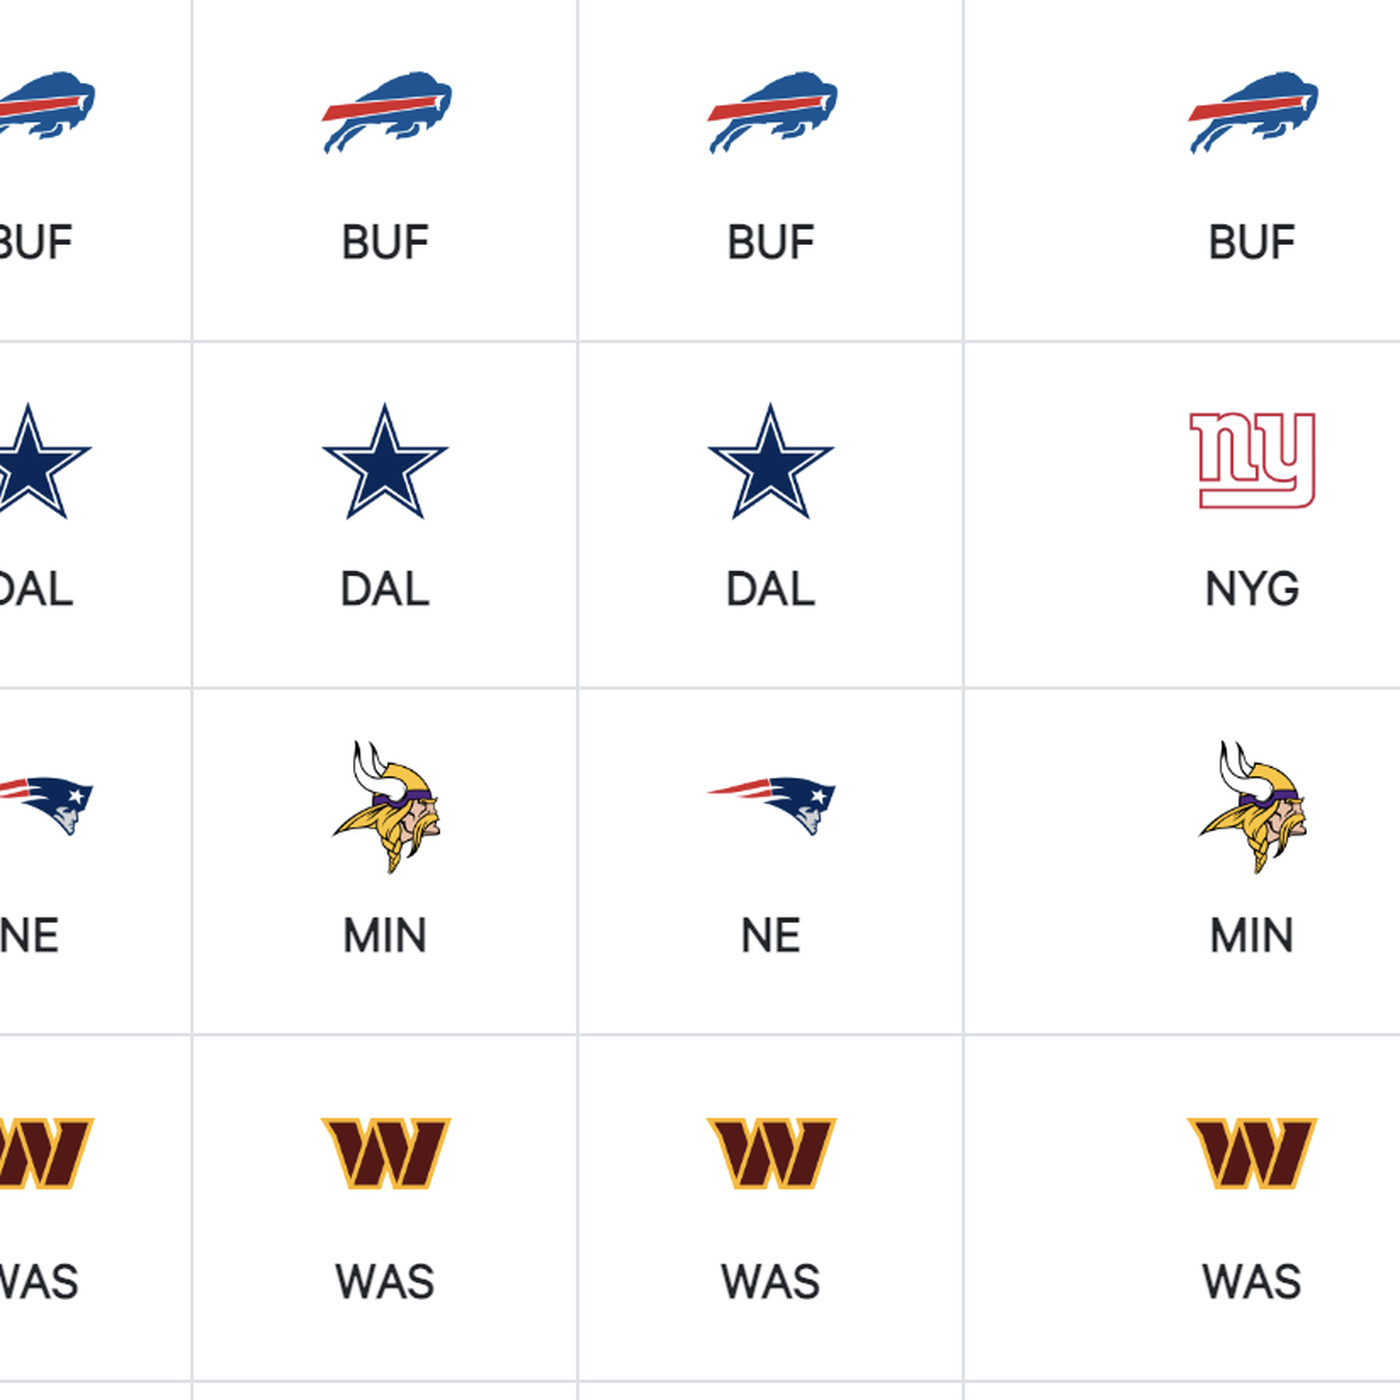 Our expert NFL picks for Week 12 of 2022 